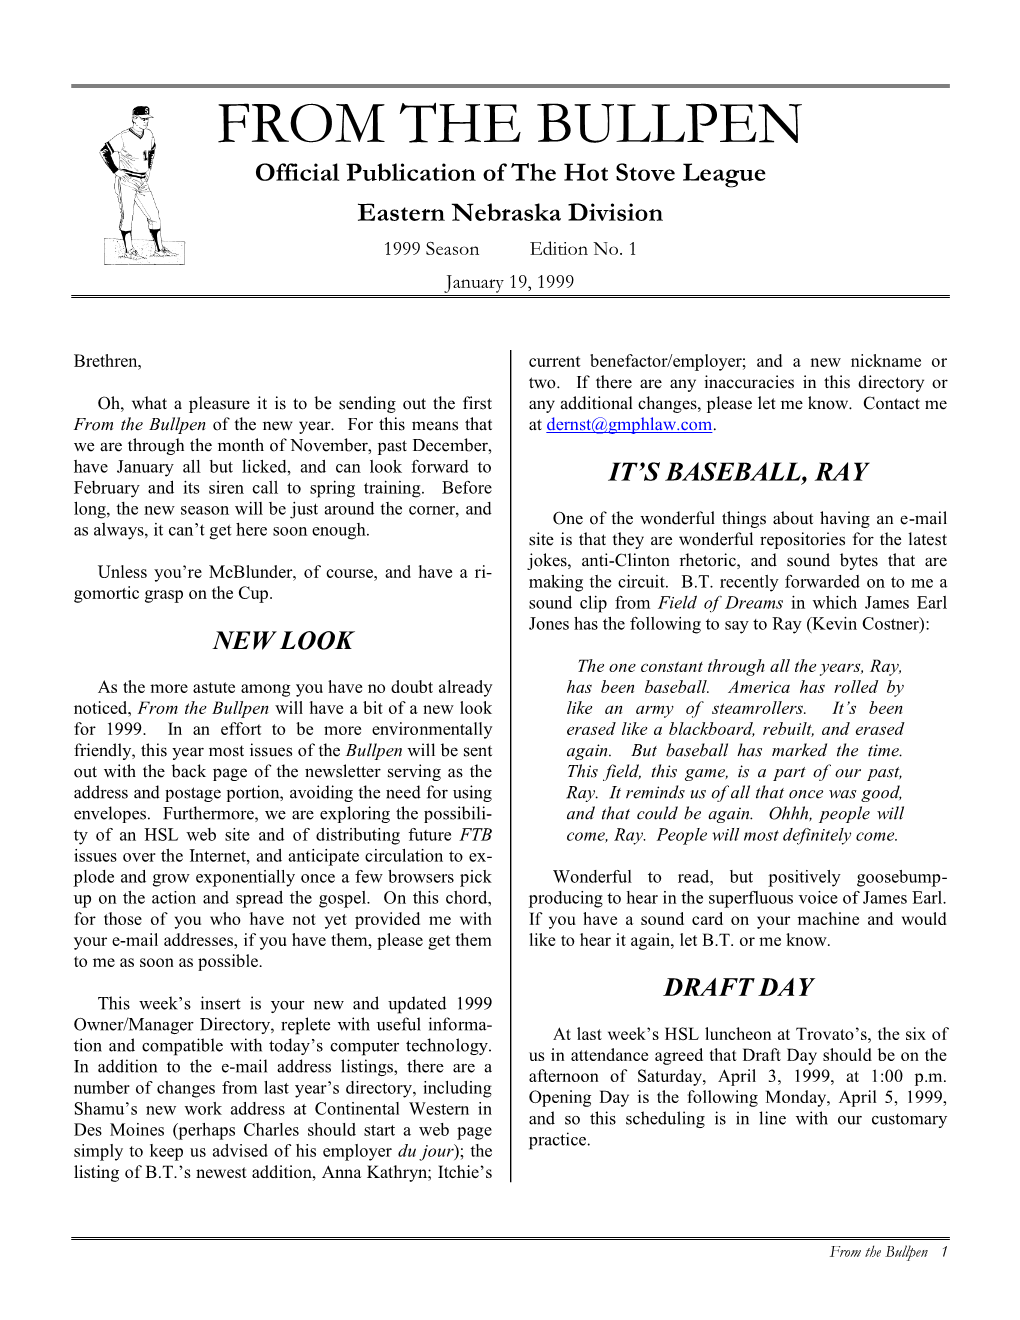 FROM the BULLPEN Official Publication of the Hot Stove League Eastern Nebraska Division 1999 Season Edition No